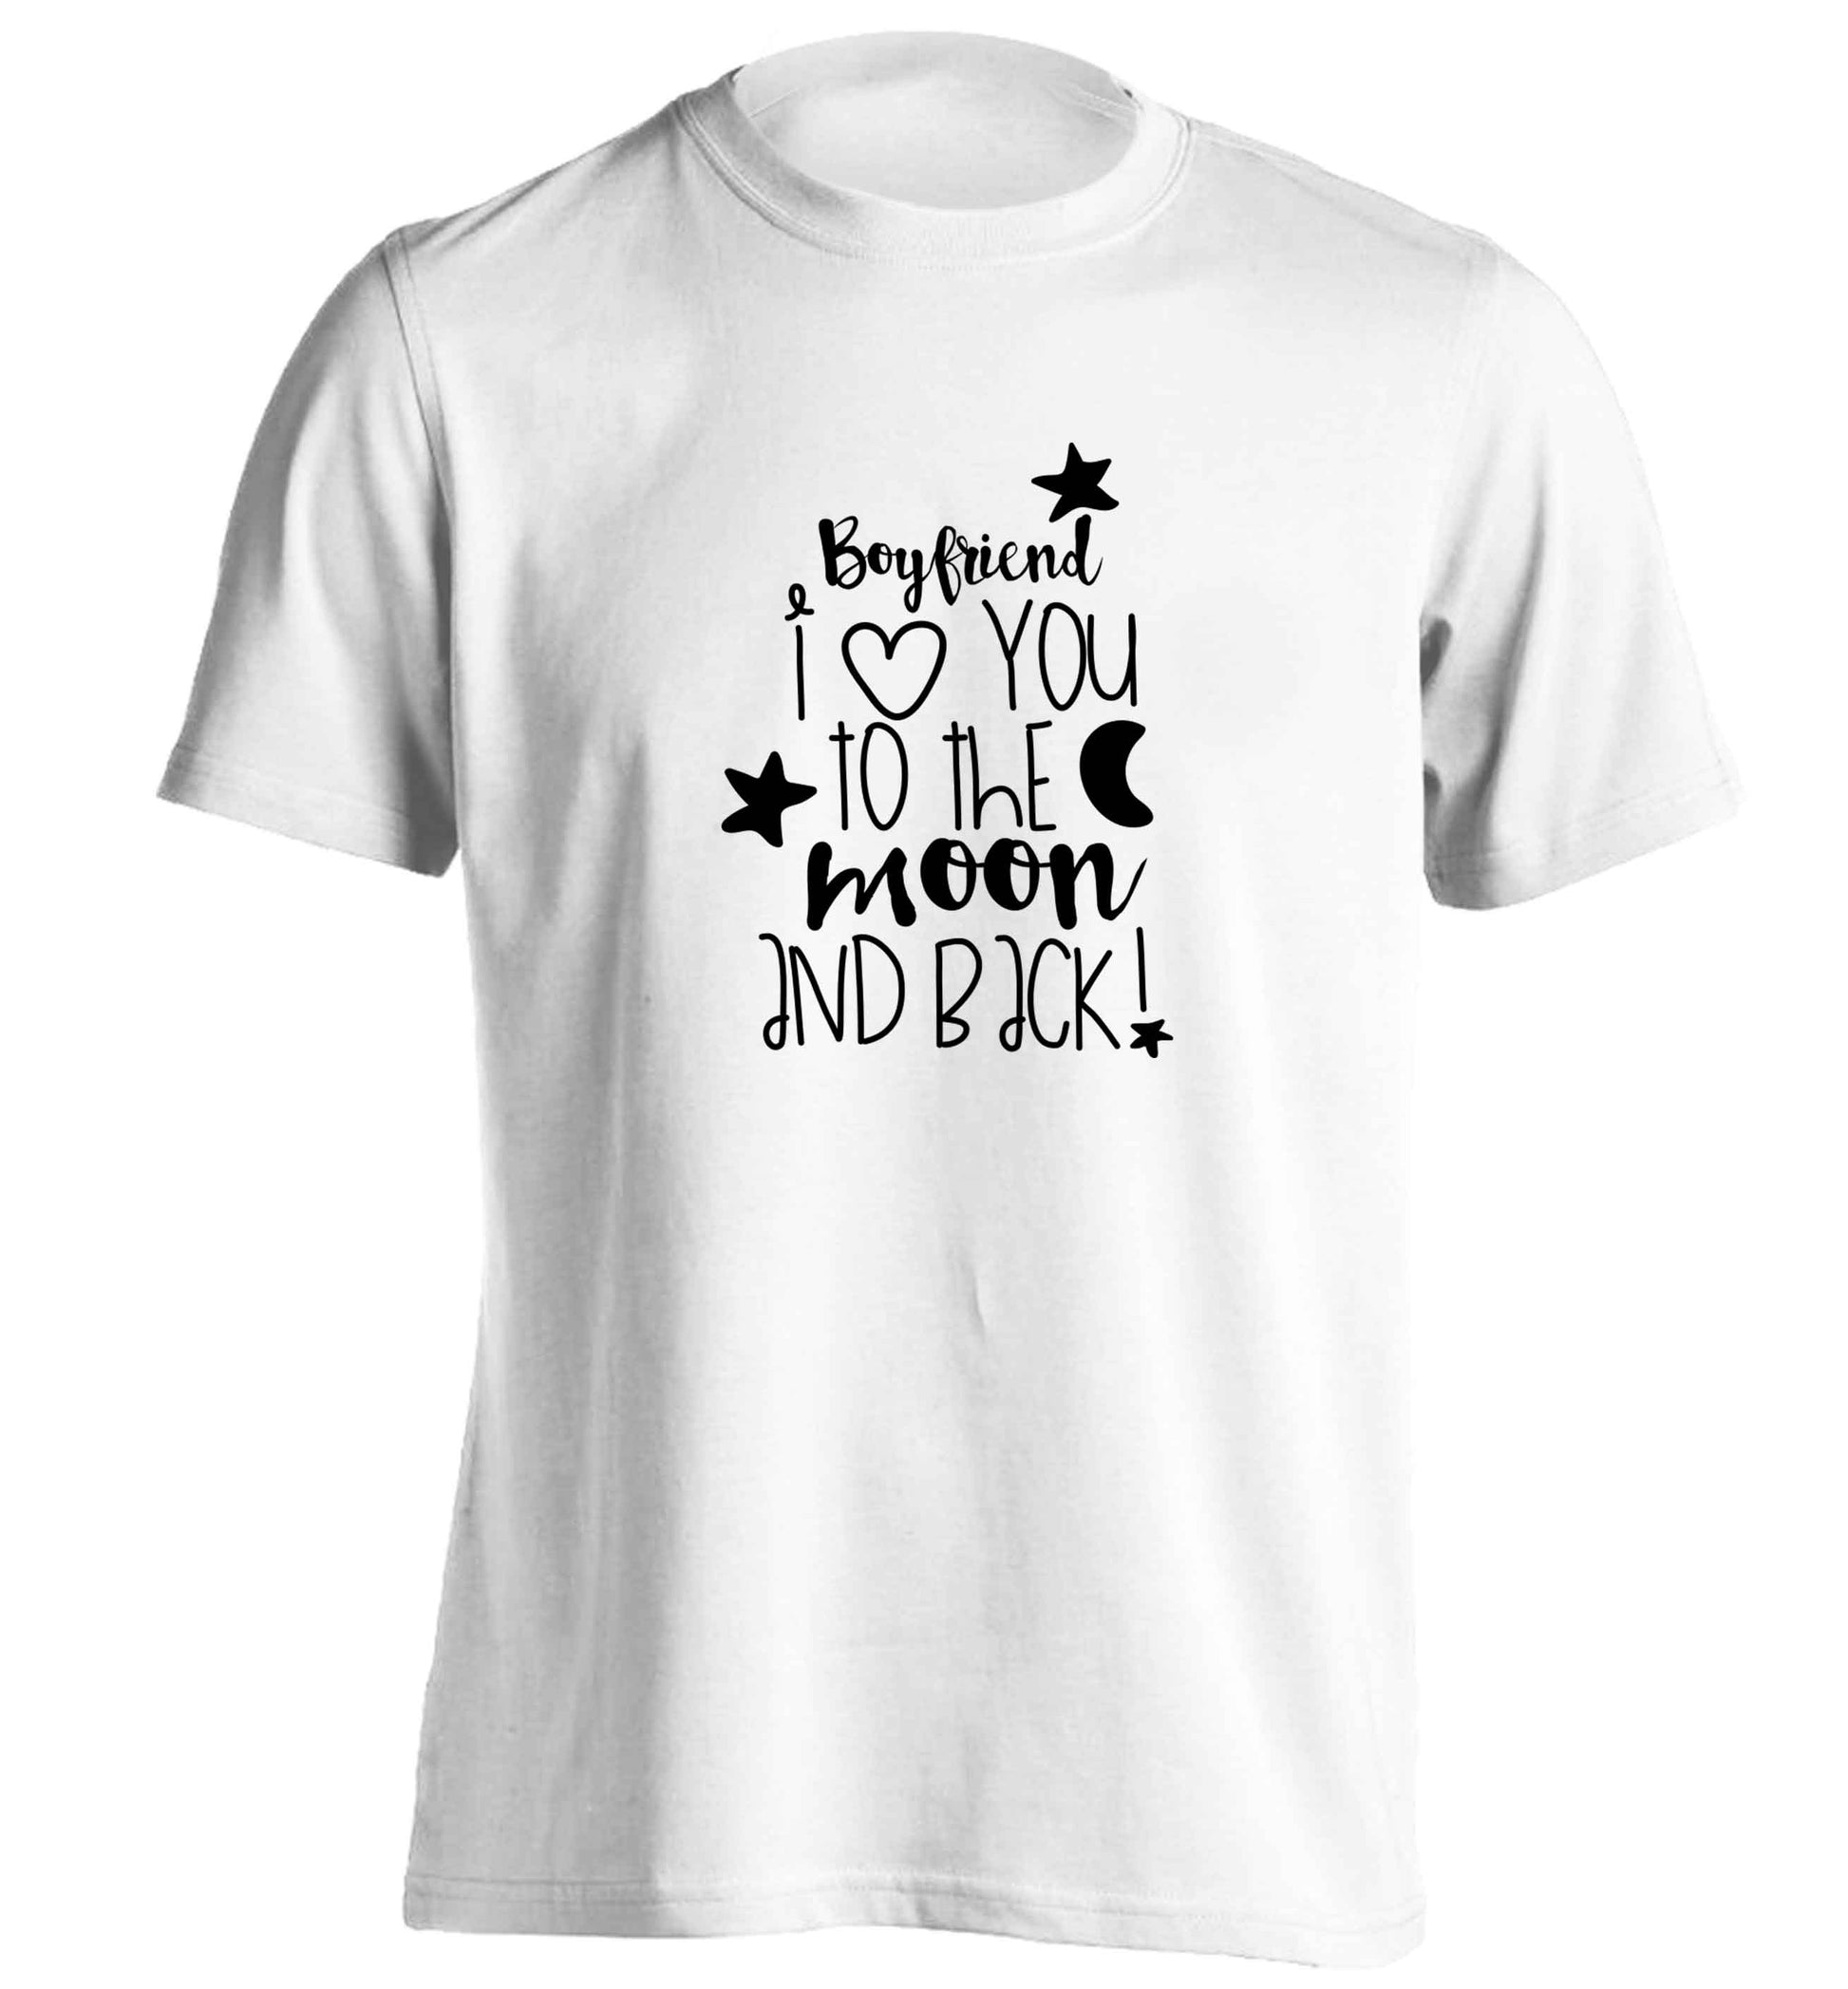 Boyfriend I love you to the moon and back adults unisex white Tshirt 2XL